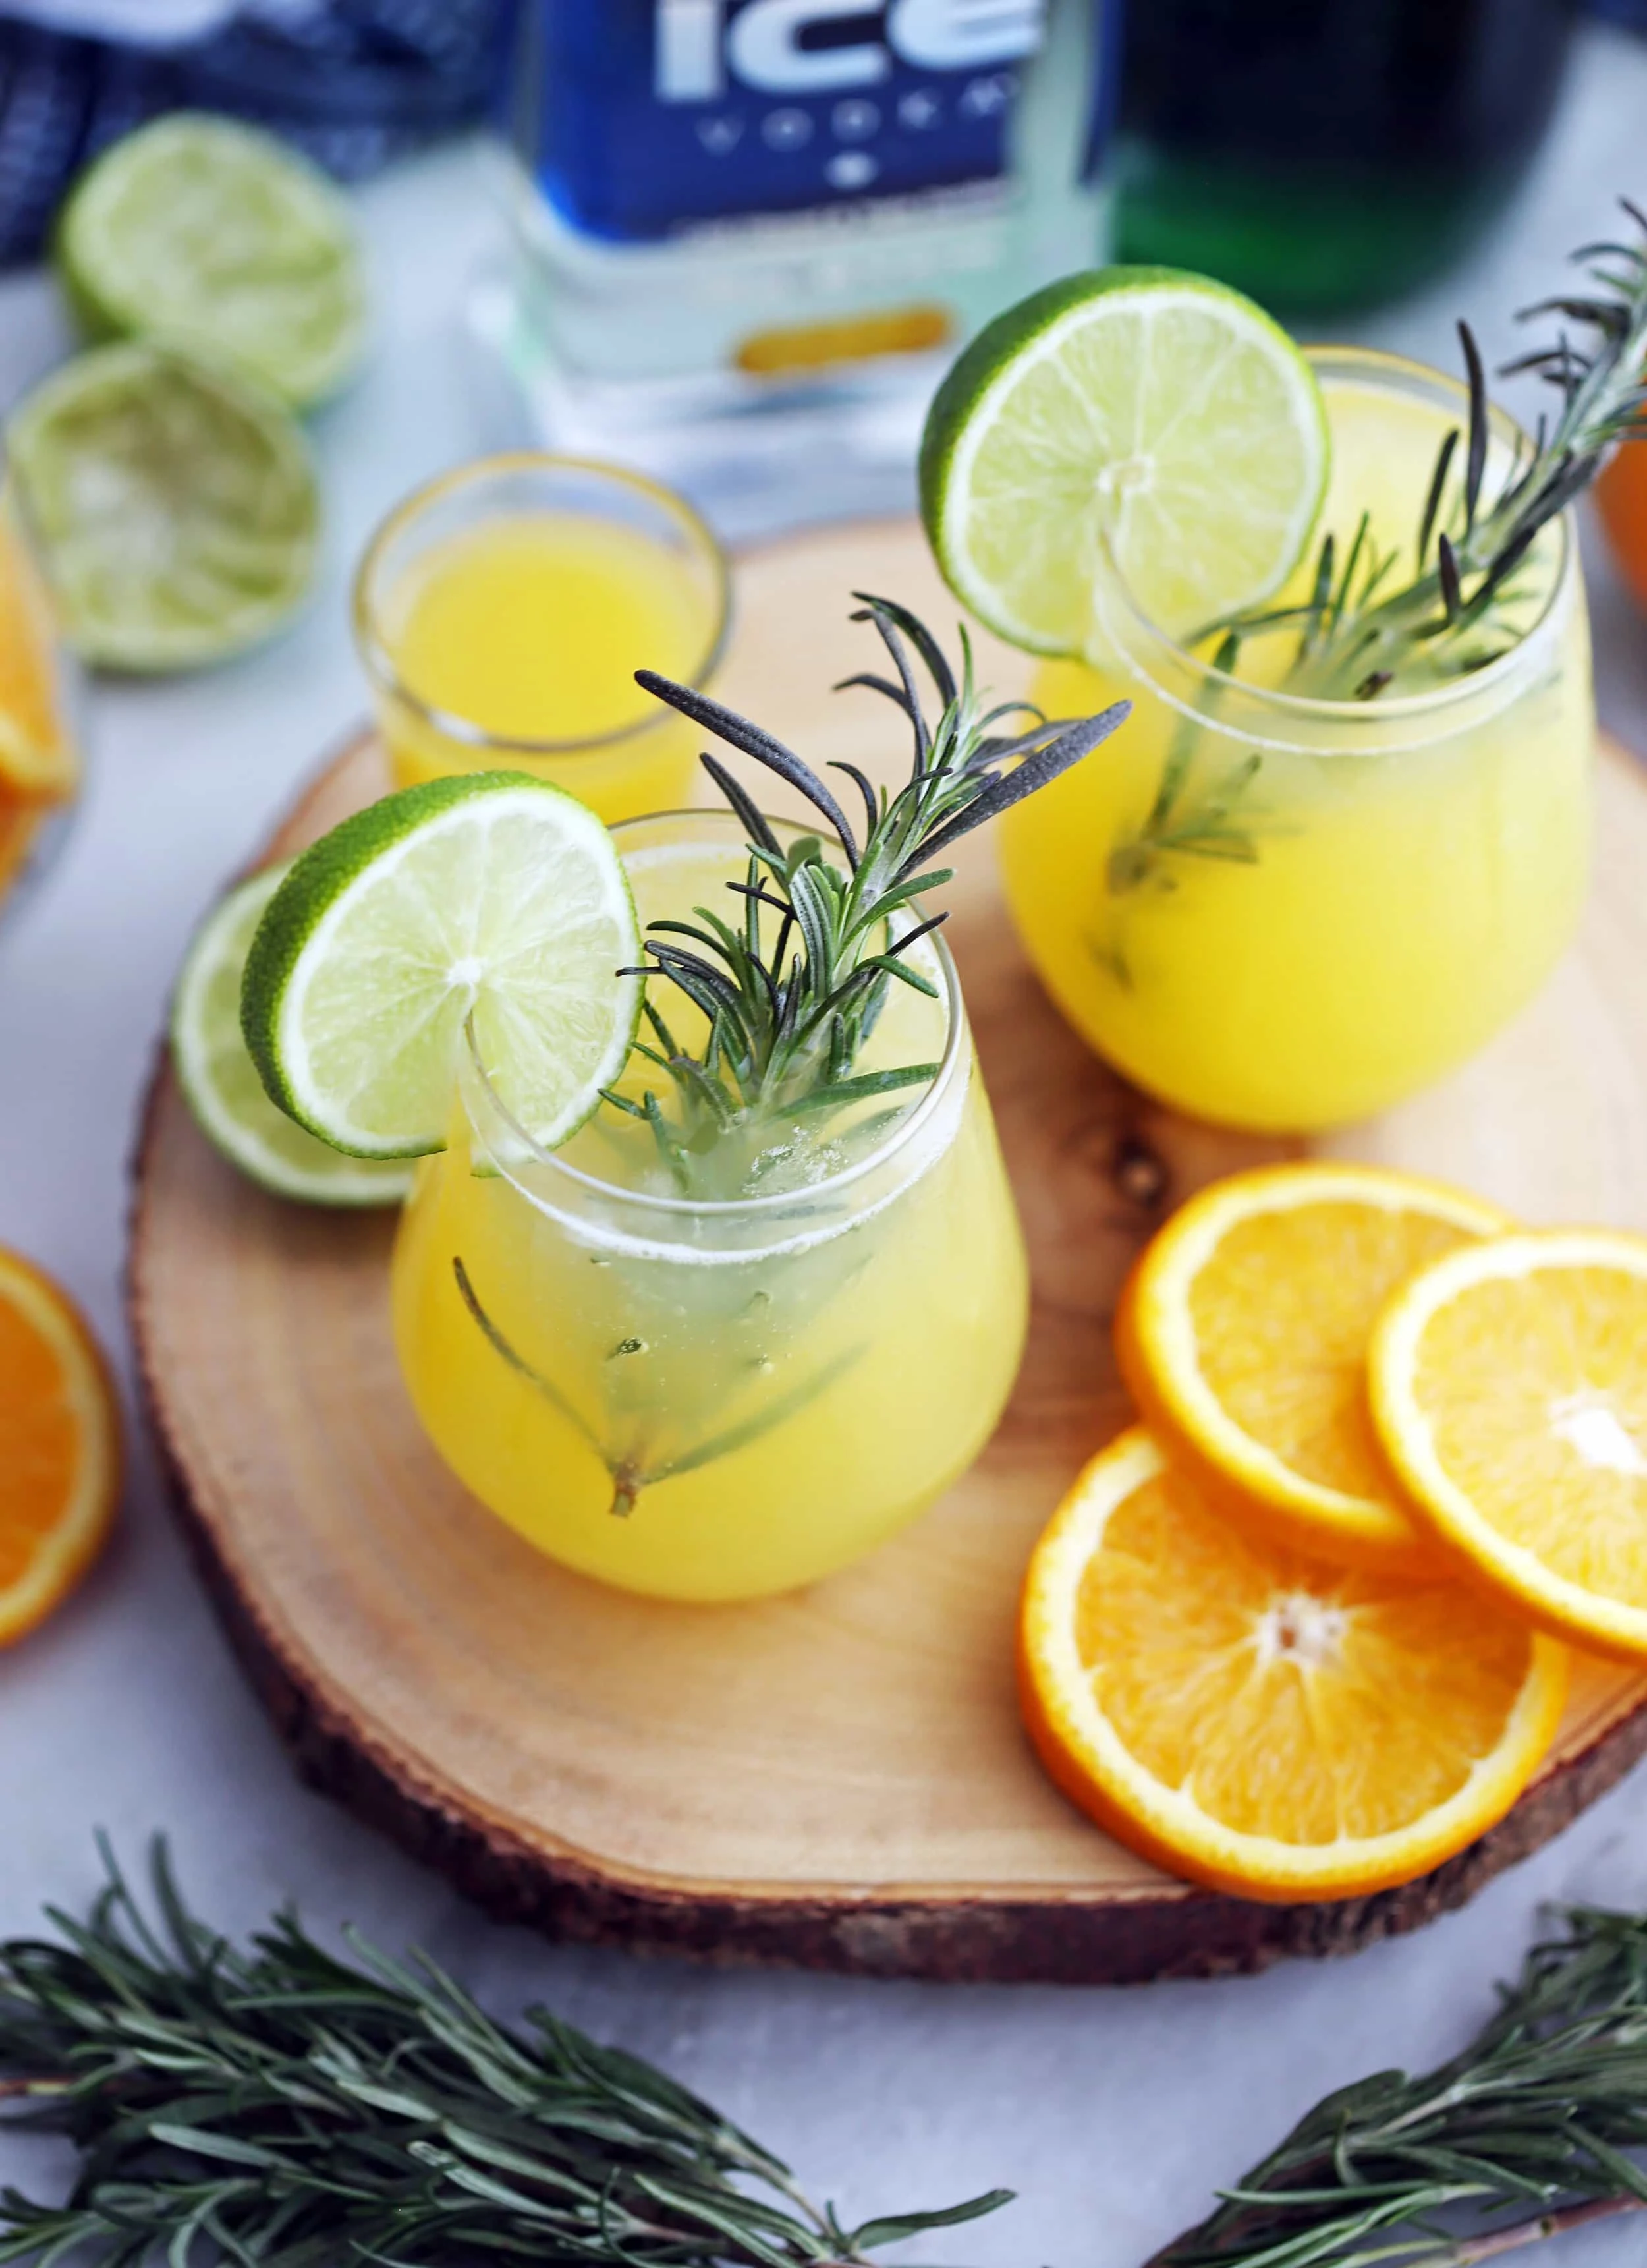 An high-angled view of two glasses of sparkling maple orange vodka with fresh rosemary sprigs, lime slices,and orange slices.